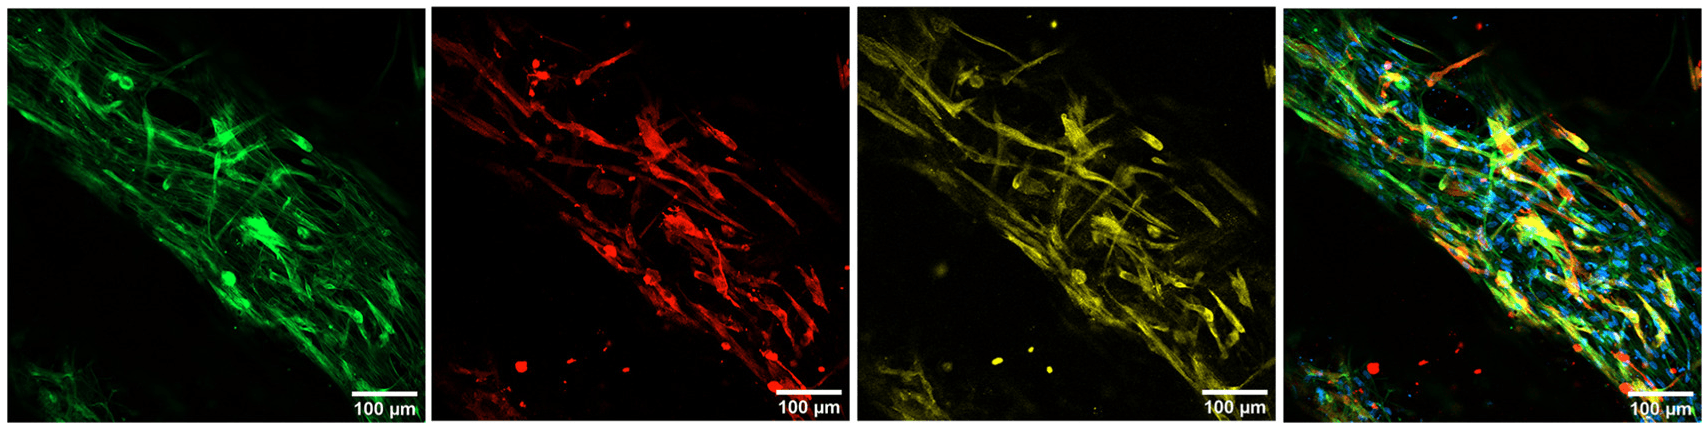 Bioprinted human muscle models. Immunostaining of bioprinted rings cultured for 14 days in GM showing Human Skeletal Muscle Myoblasts (HSMM) fibers expressing MHC (red) and α-actinin (yellow). F-actin (green) and nuclei (blue) were also stained. Scale bar = 100 μm. Data is presented as mean ± SD, Unpaired t-test *p-value <0.05, **p-value <0.005 and ***p-value <0.0005. Actin was stained with Phalloidin-iFluor 488. Source: <b>3D bioprinted functional skeletal muscle models have potential applications for studies of muscle wasting in cancer cachexia</b> by Andrea García-Lizarribar et.al., <em>Biomaterials Advances</em> April 2023.